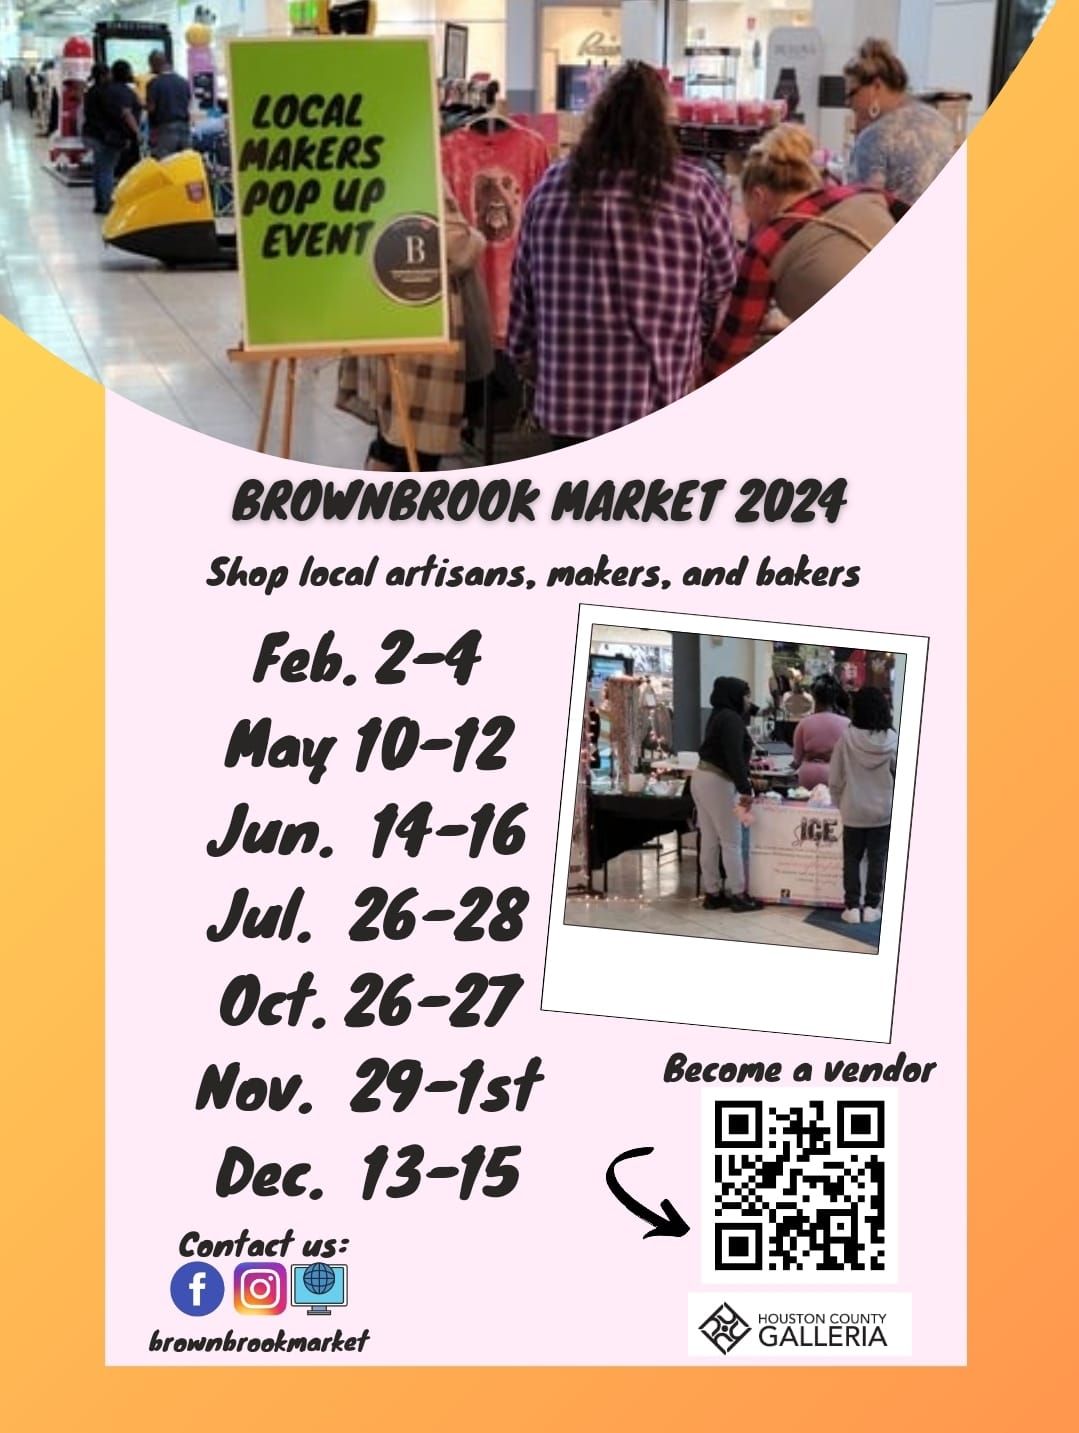 Local Makers Pop Up Event "Back to School Market"